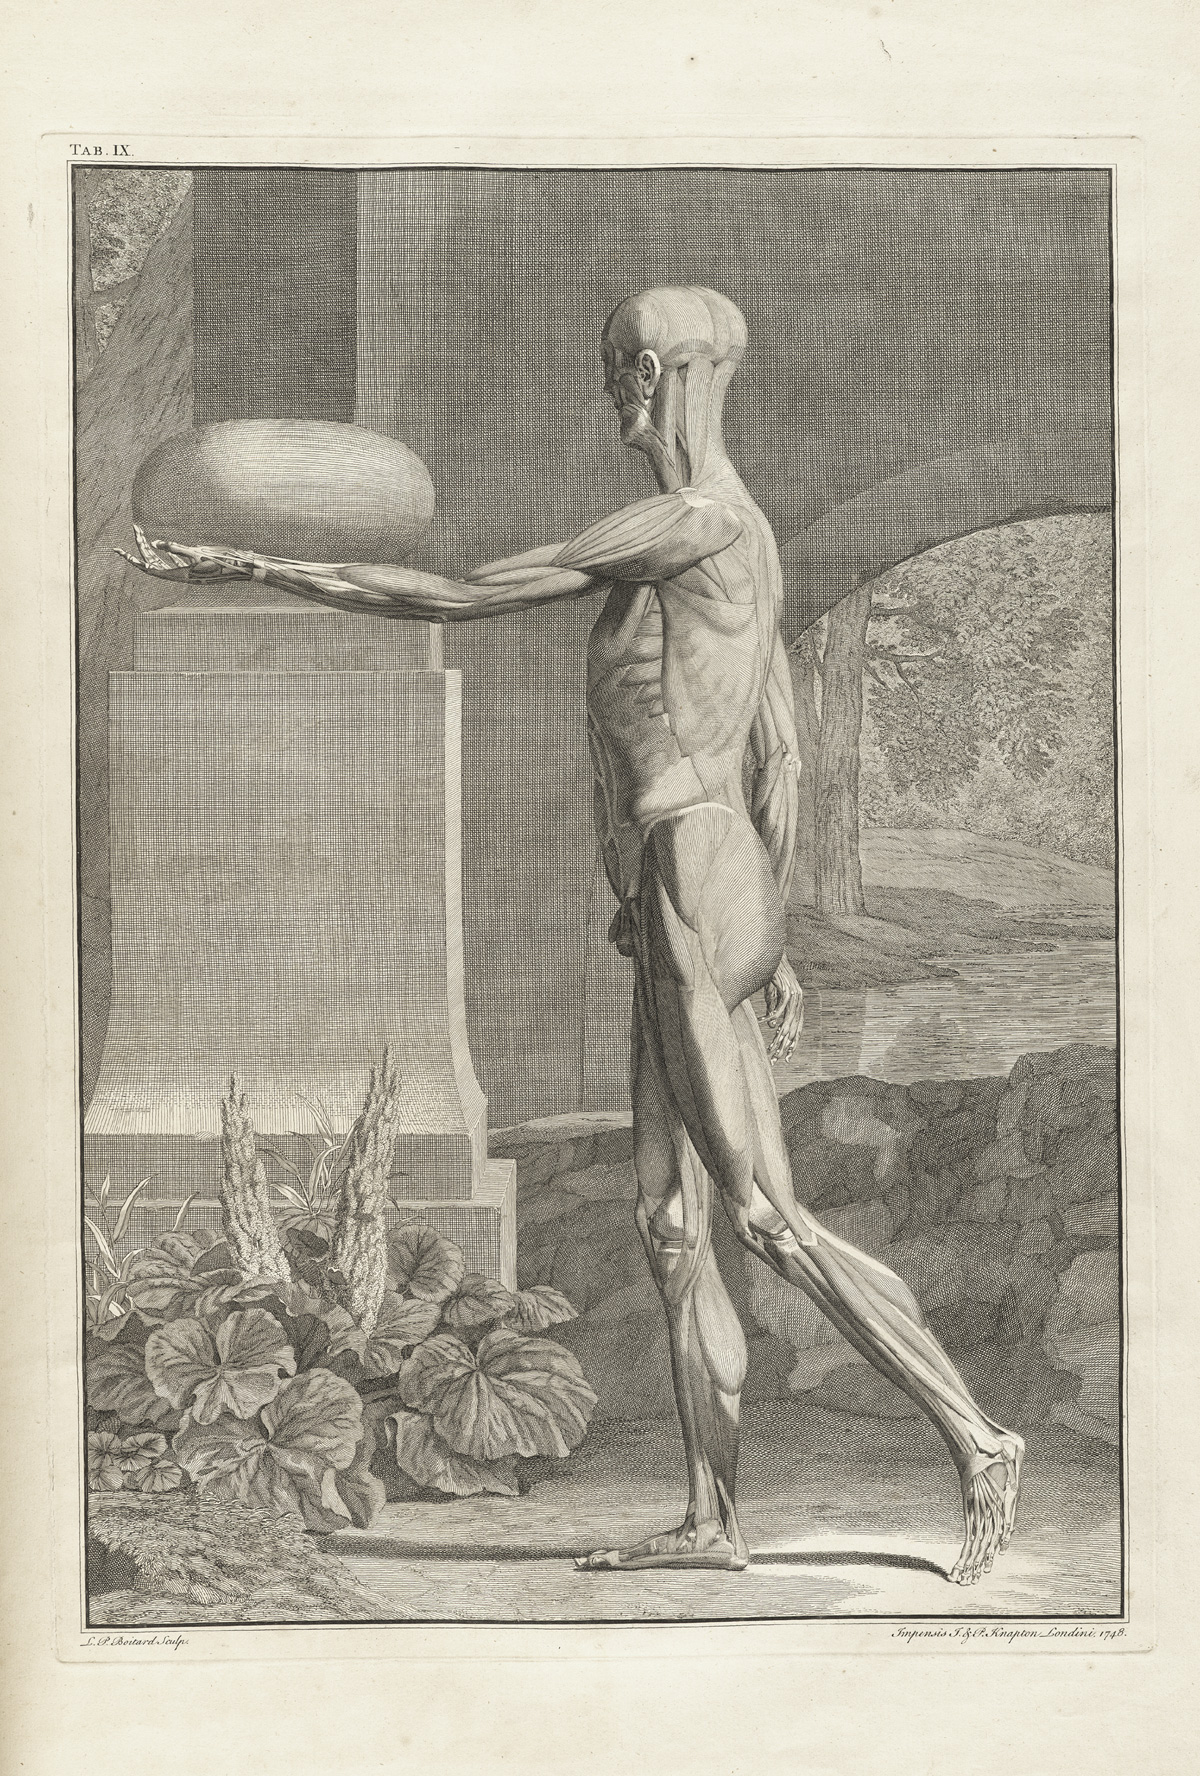 Table 9 of Bernhard Siegfried Albinus' Tabulae sceleti et musculorum corporis humani, featuring a full length left side view of a flayed corpse with its left arm is extended in front with the palm up. The exterior muscles have been removed to show the muscles underneath.